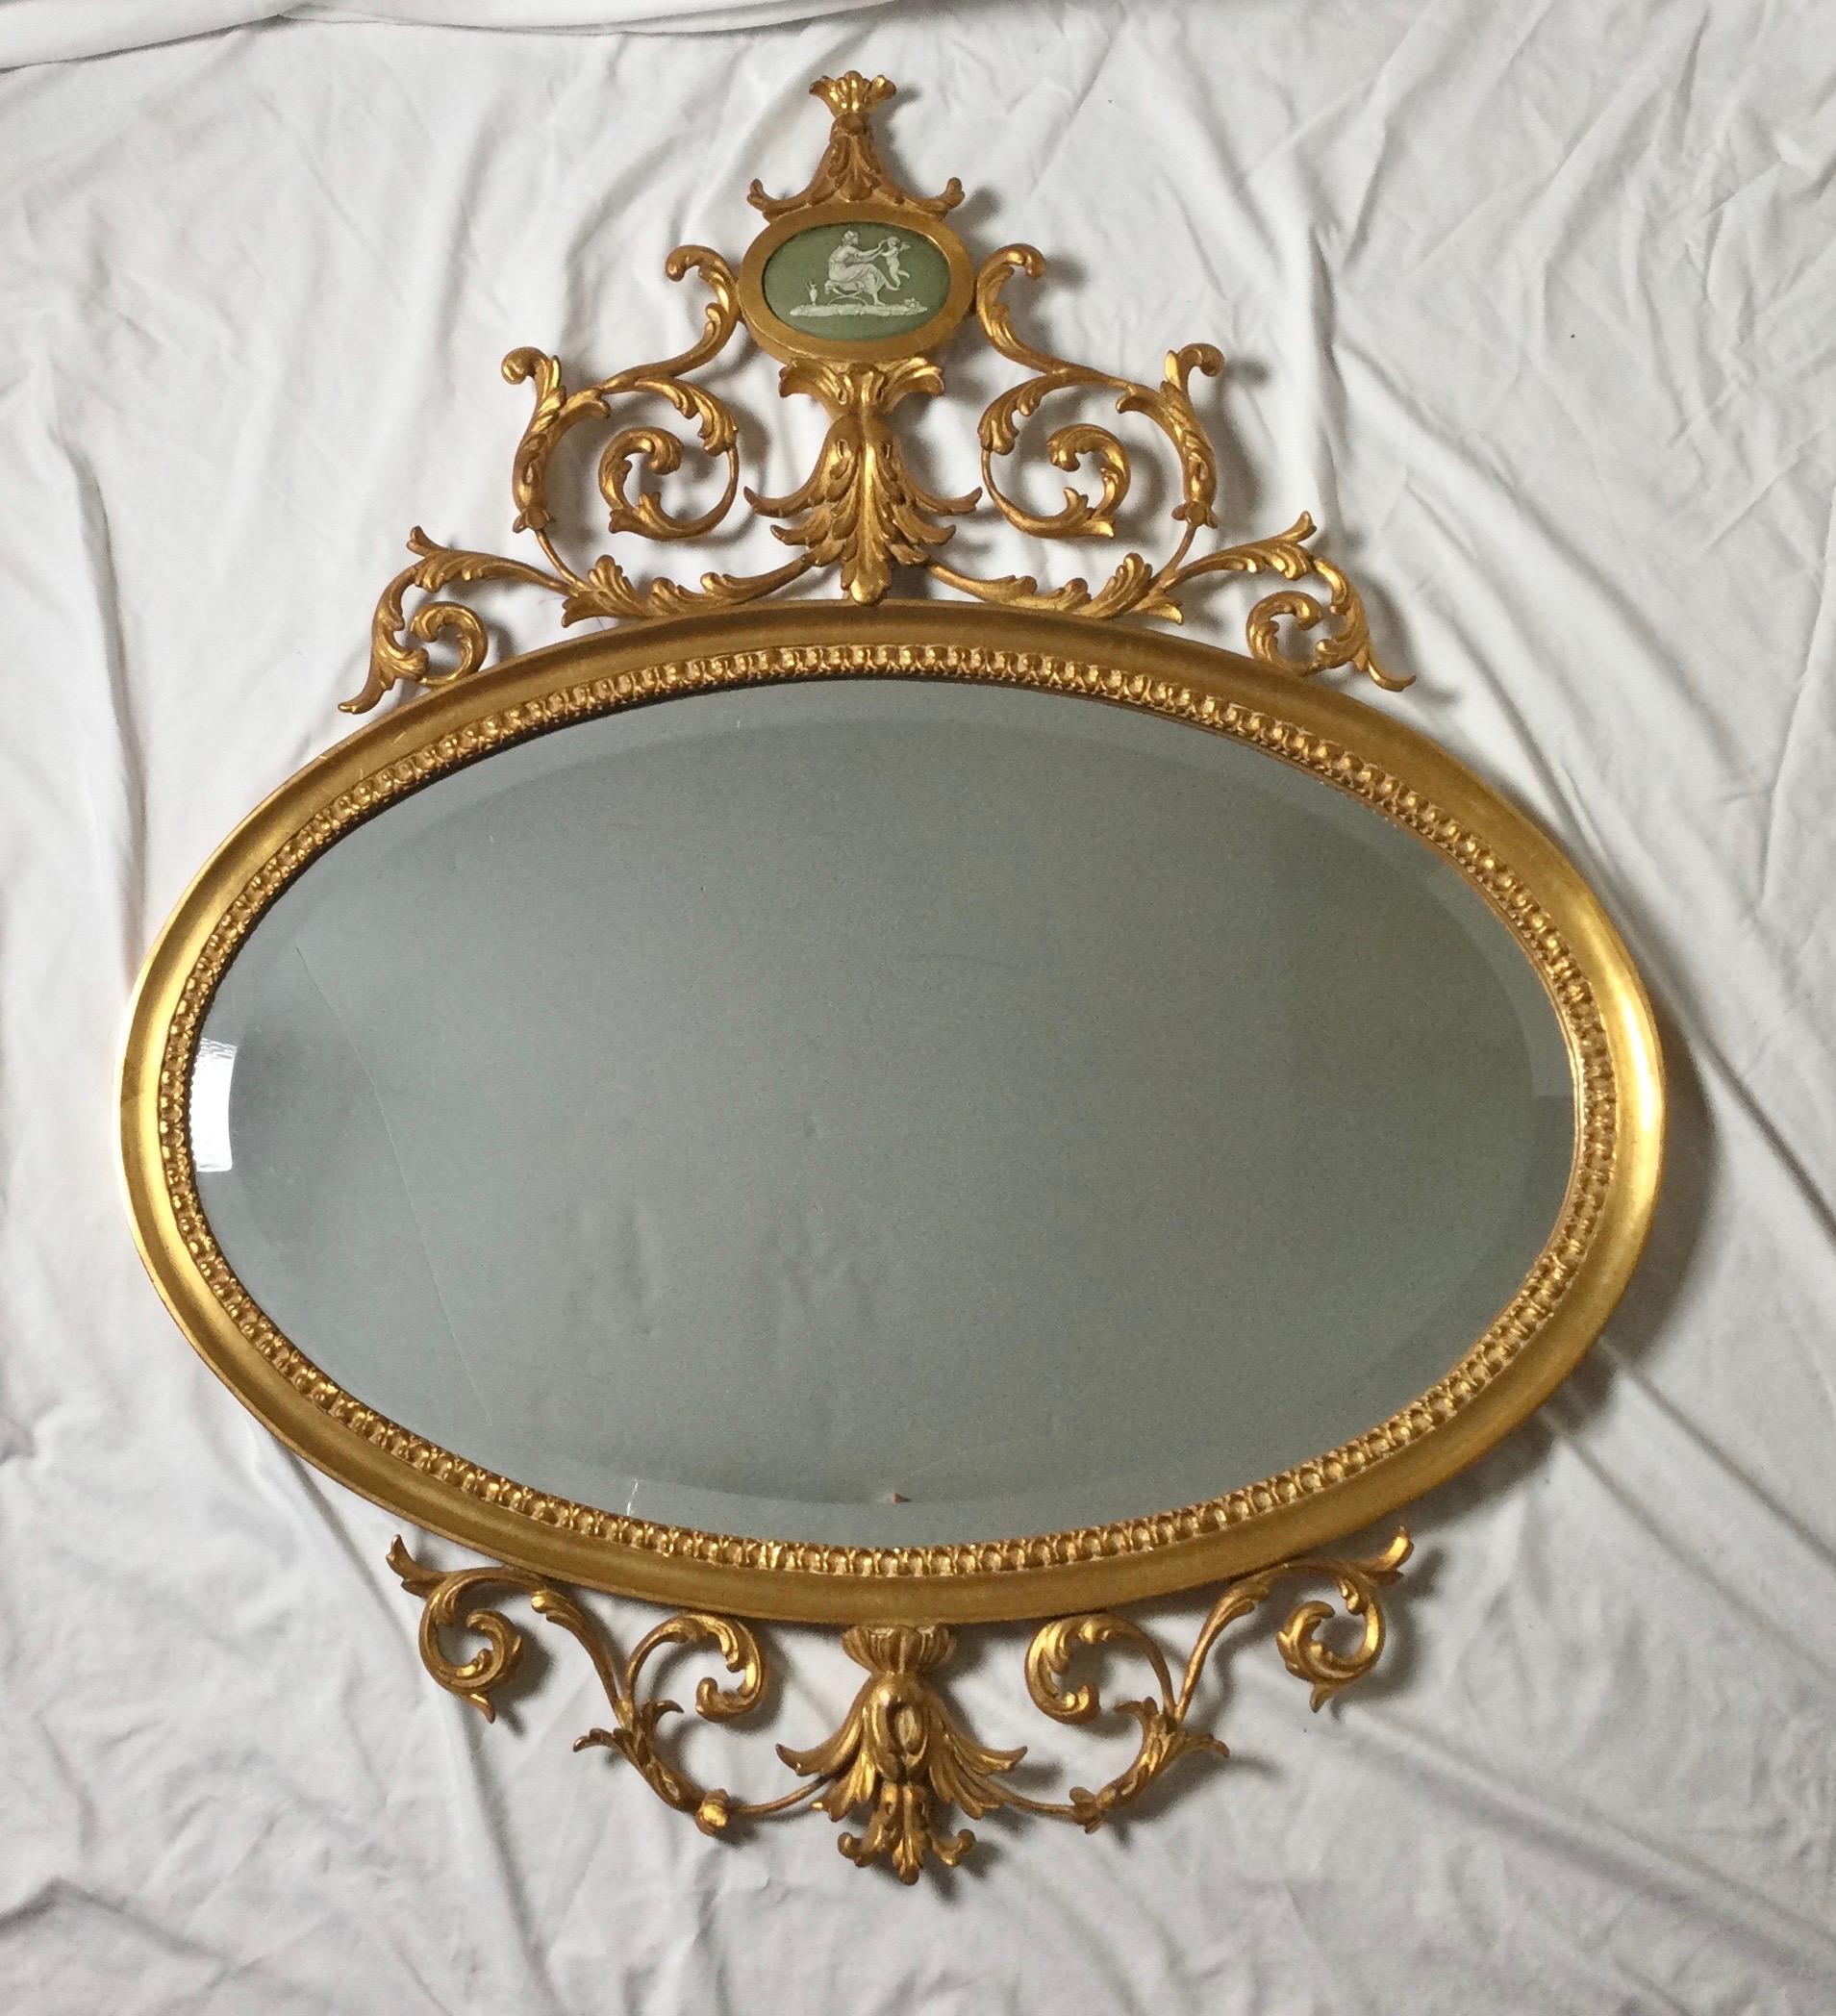 Elegant Louis XV style oval mirror in gilt wood.. The elaborate from with a center cartouche at the pediment painted to look like Jasperware. The mirror with an elegant bevel.